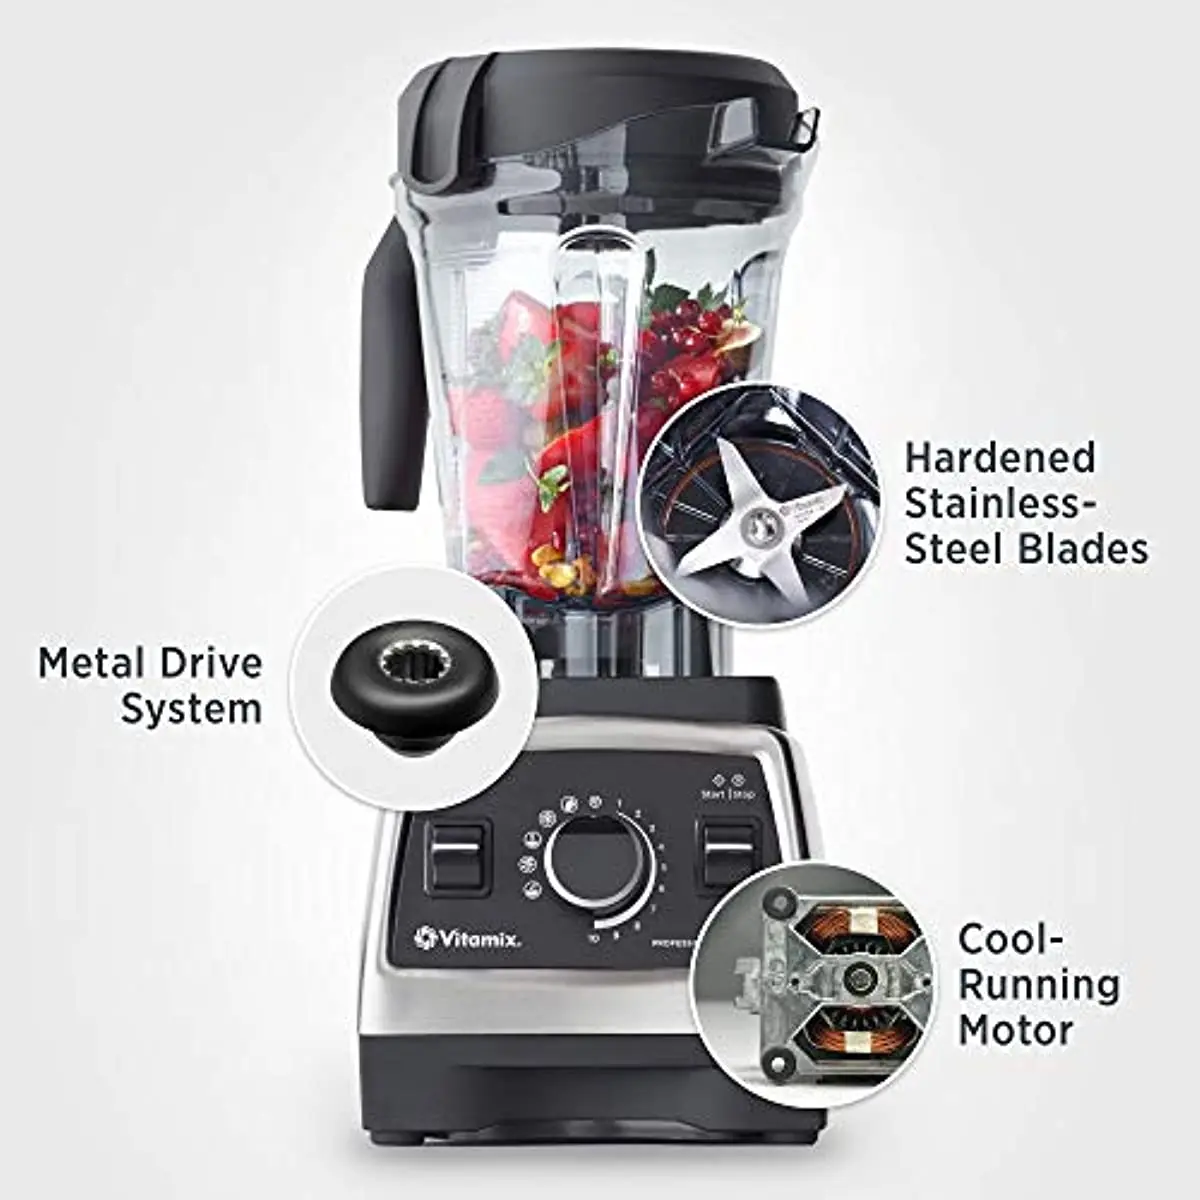 https://ae01.alicdn.com/kf/S804e409634434e9ba2c03e303bae04fec/Vitamix-Professional-Series-750-Blender-Professional-Grade-64-oz-Low-Profile-Container-Black-Self-Cleaning-1957.jpg